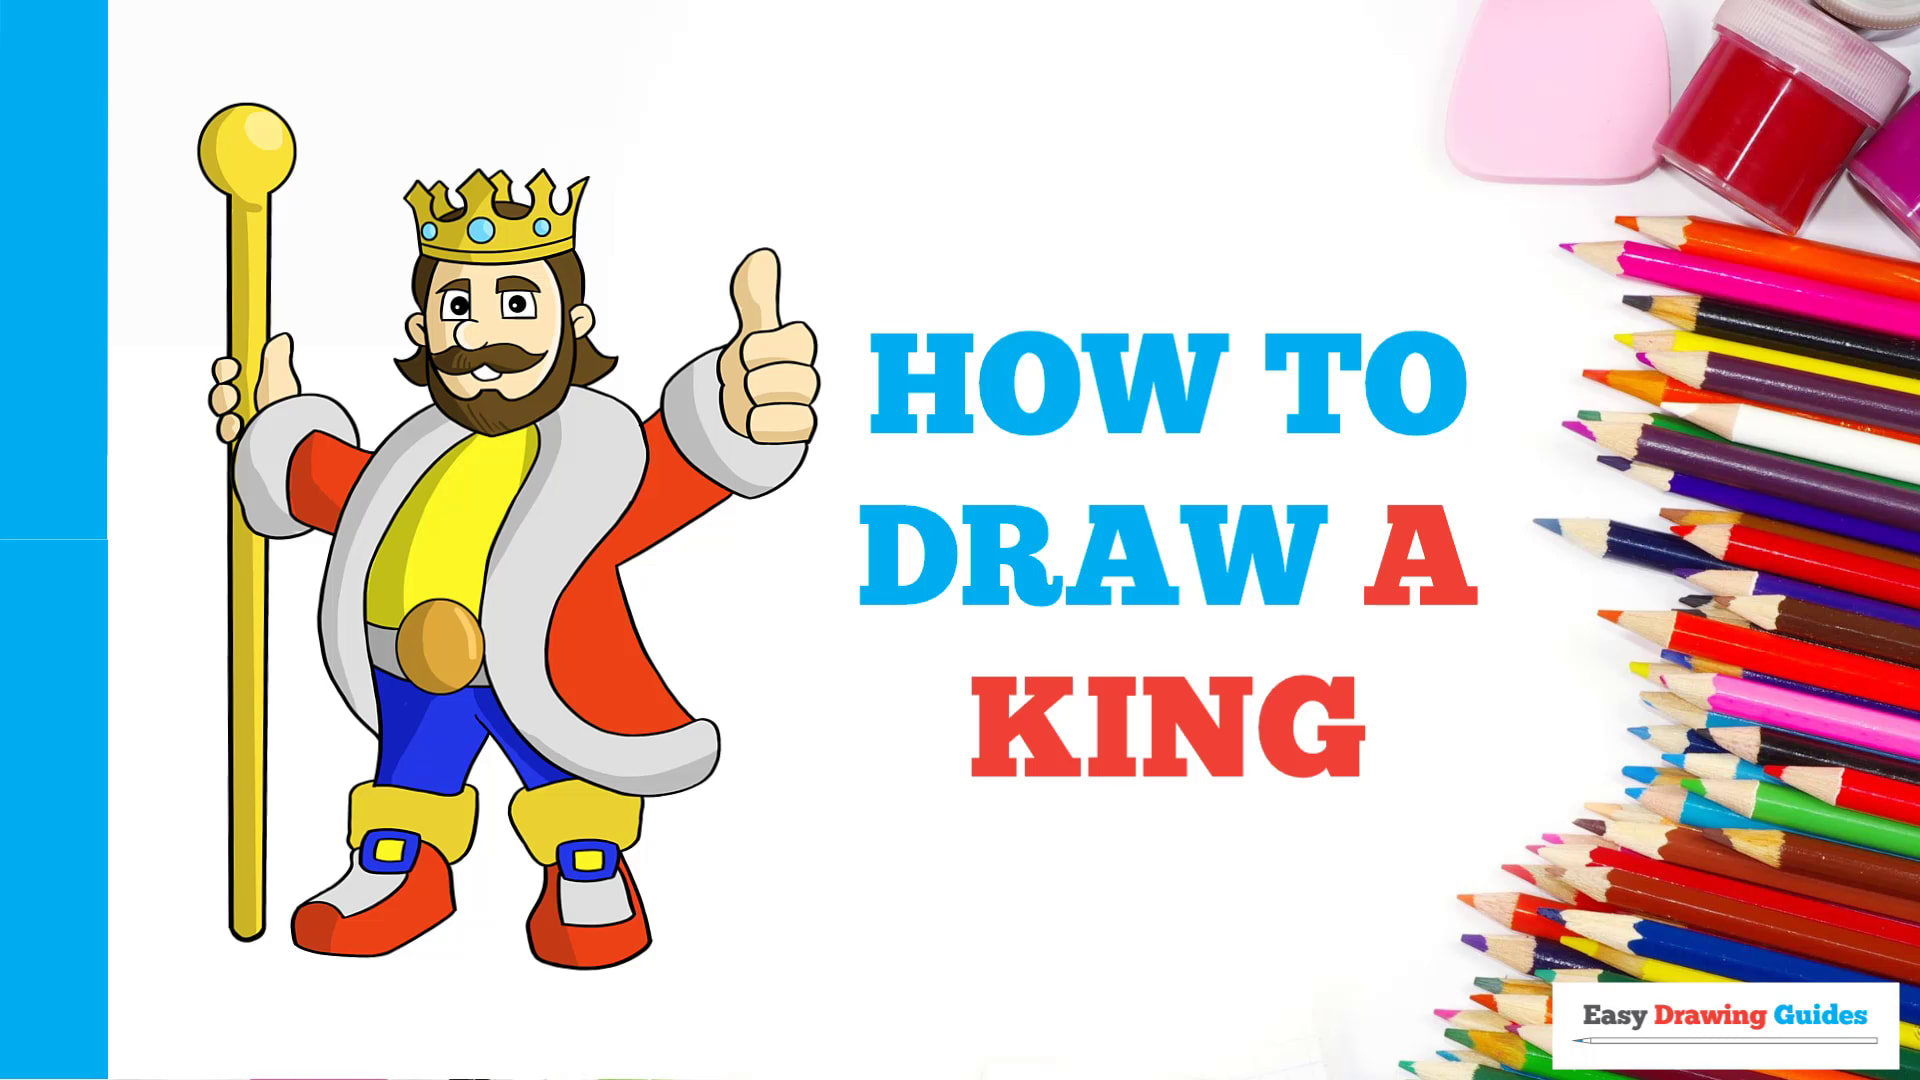 How to Draw a King - Really Easy Drawing Tutorial